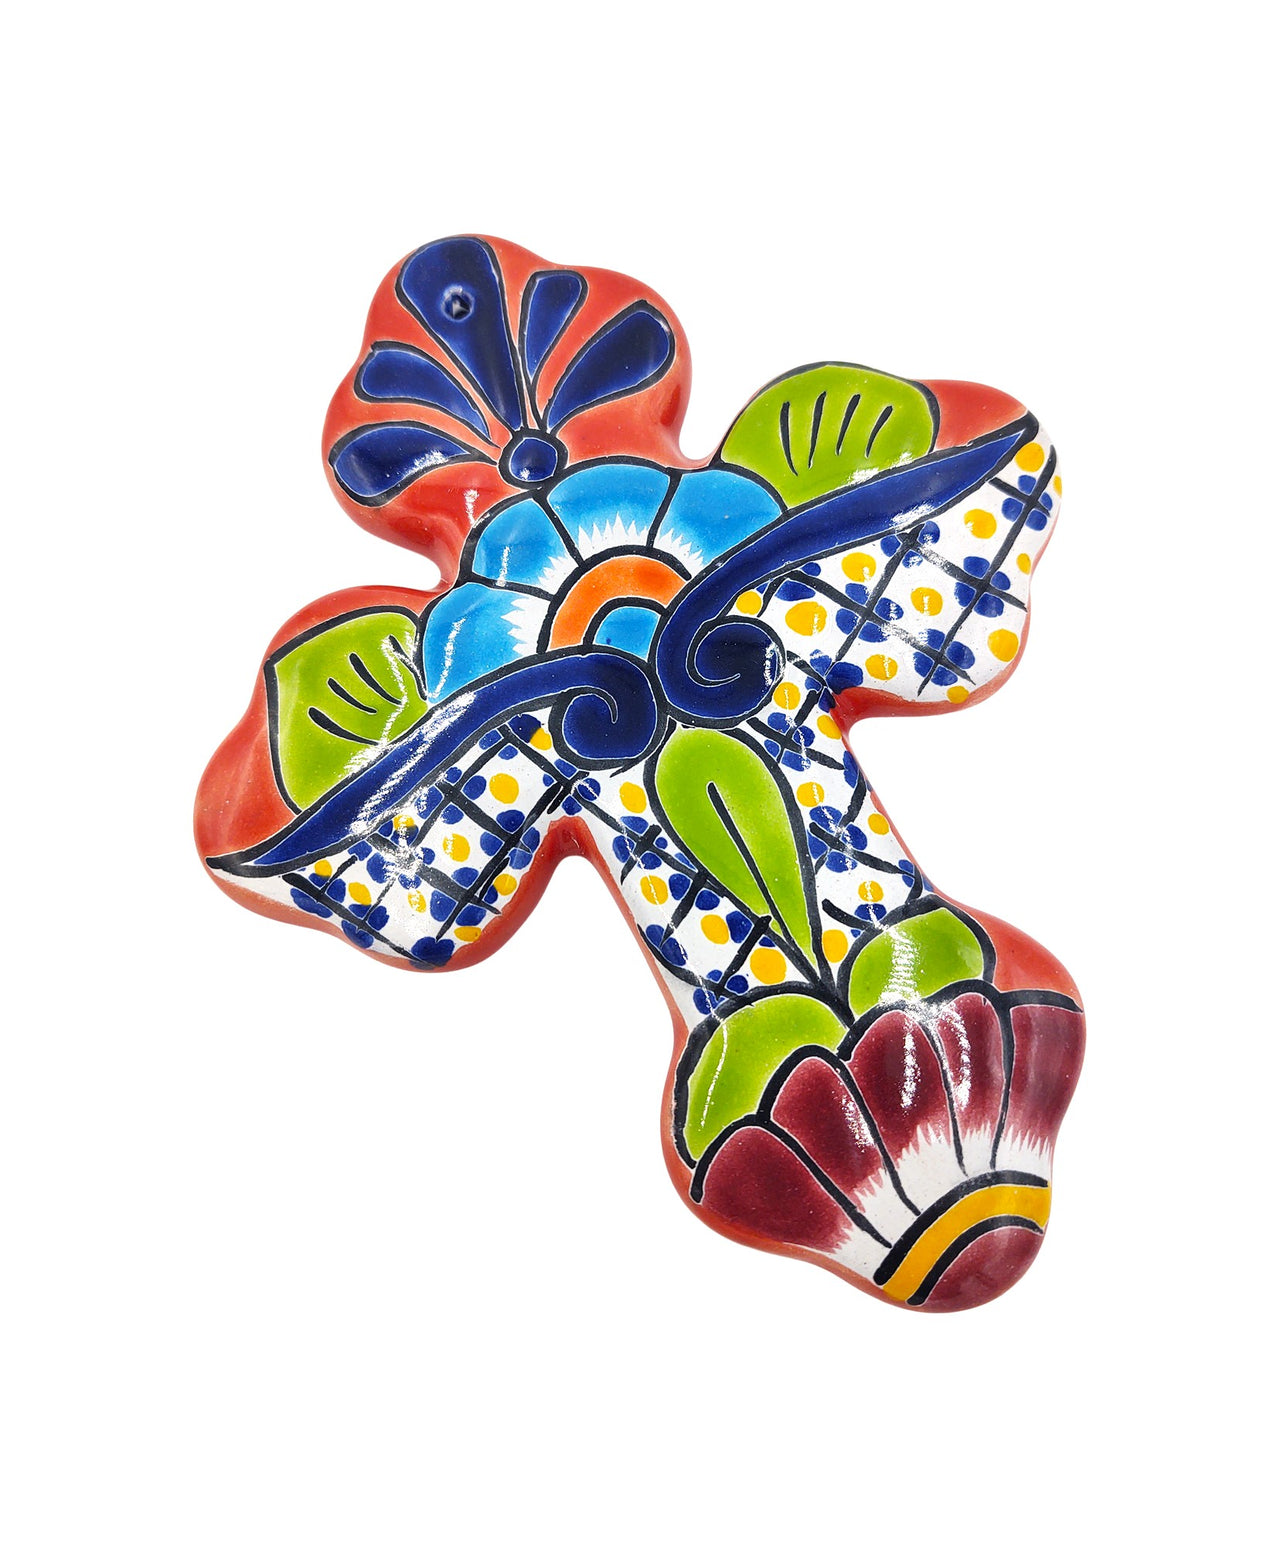 Mexican Talavera Wall Cross 8.5" - Hand Painted, Traditional Mexican Décor - Red Trim